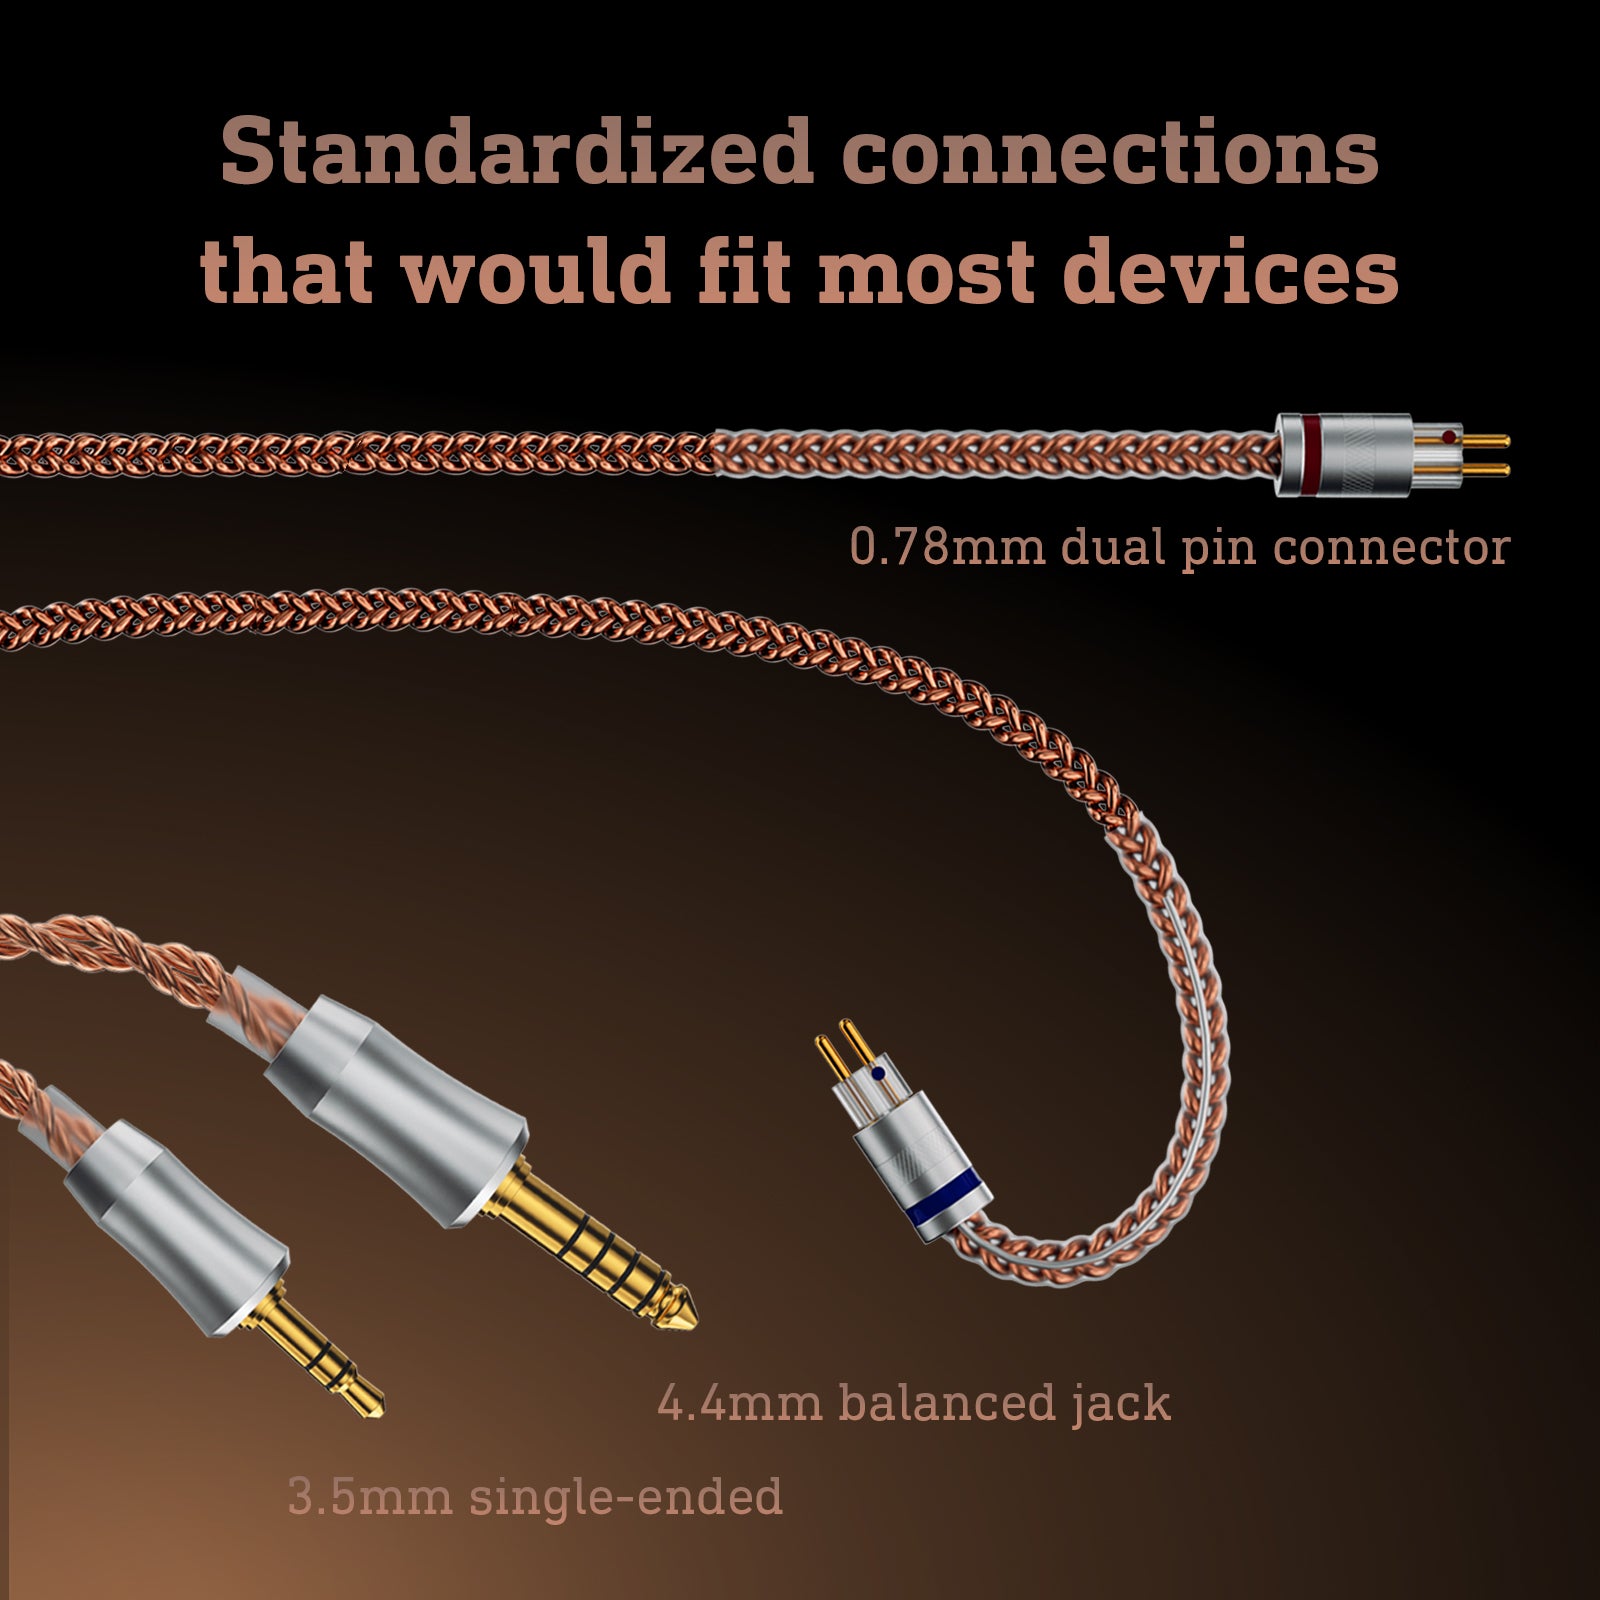 LETSHUOER LR-Nebula 6N Monocrystalline Copper IEM cable, HiFi Audio Replacement Cable, Wired Upgraded Earphones Cable with 0.78mm 2 Pin(3.5mm single-ended / 4.4mm balanced cable)